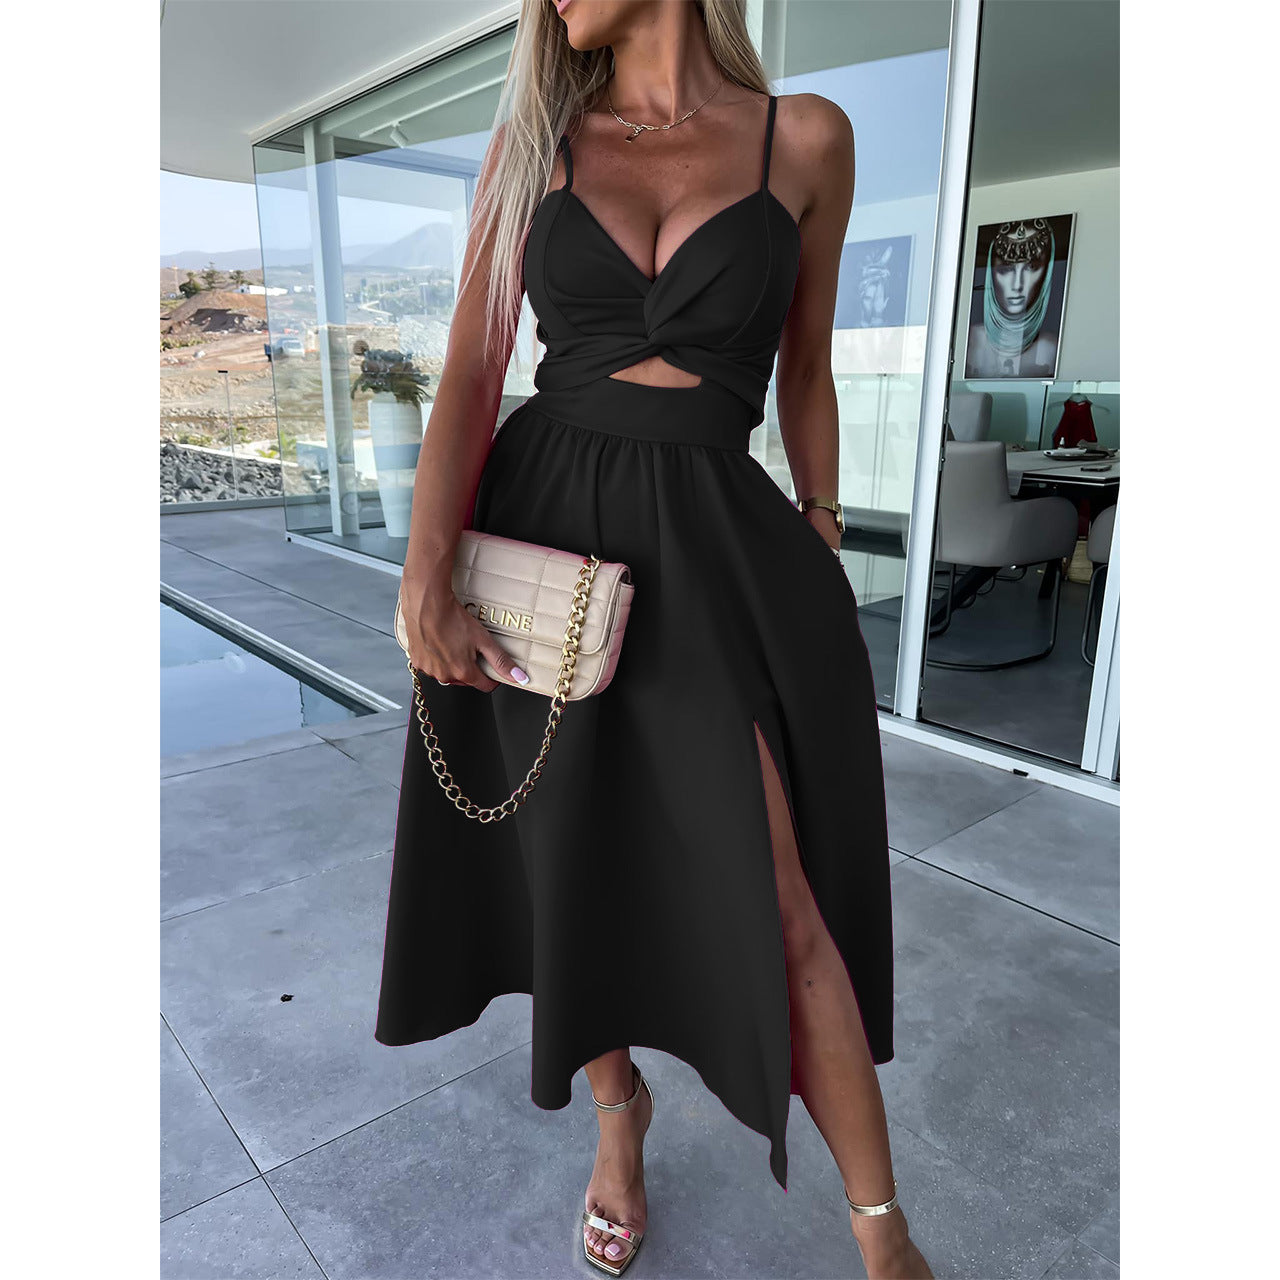 Embrace Elegance and Style with the Women's Fashion Hollowed-out Large Skirt Camisole Gown Dress